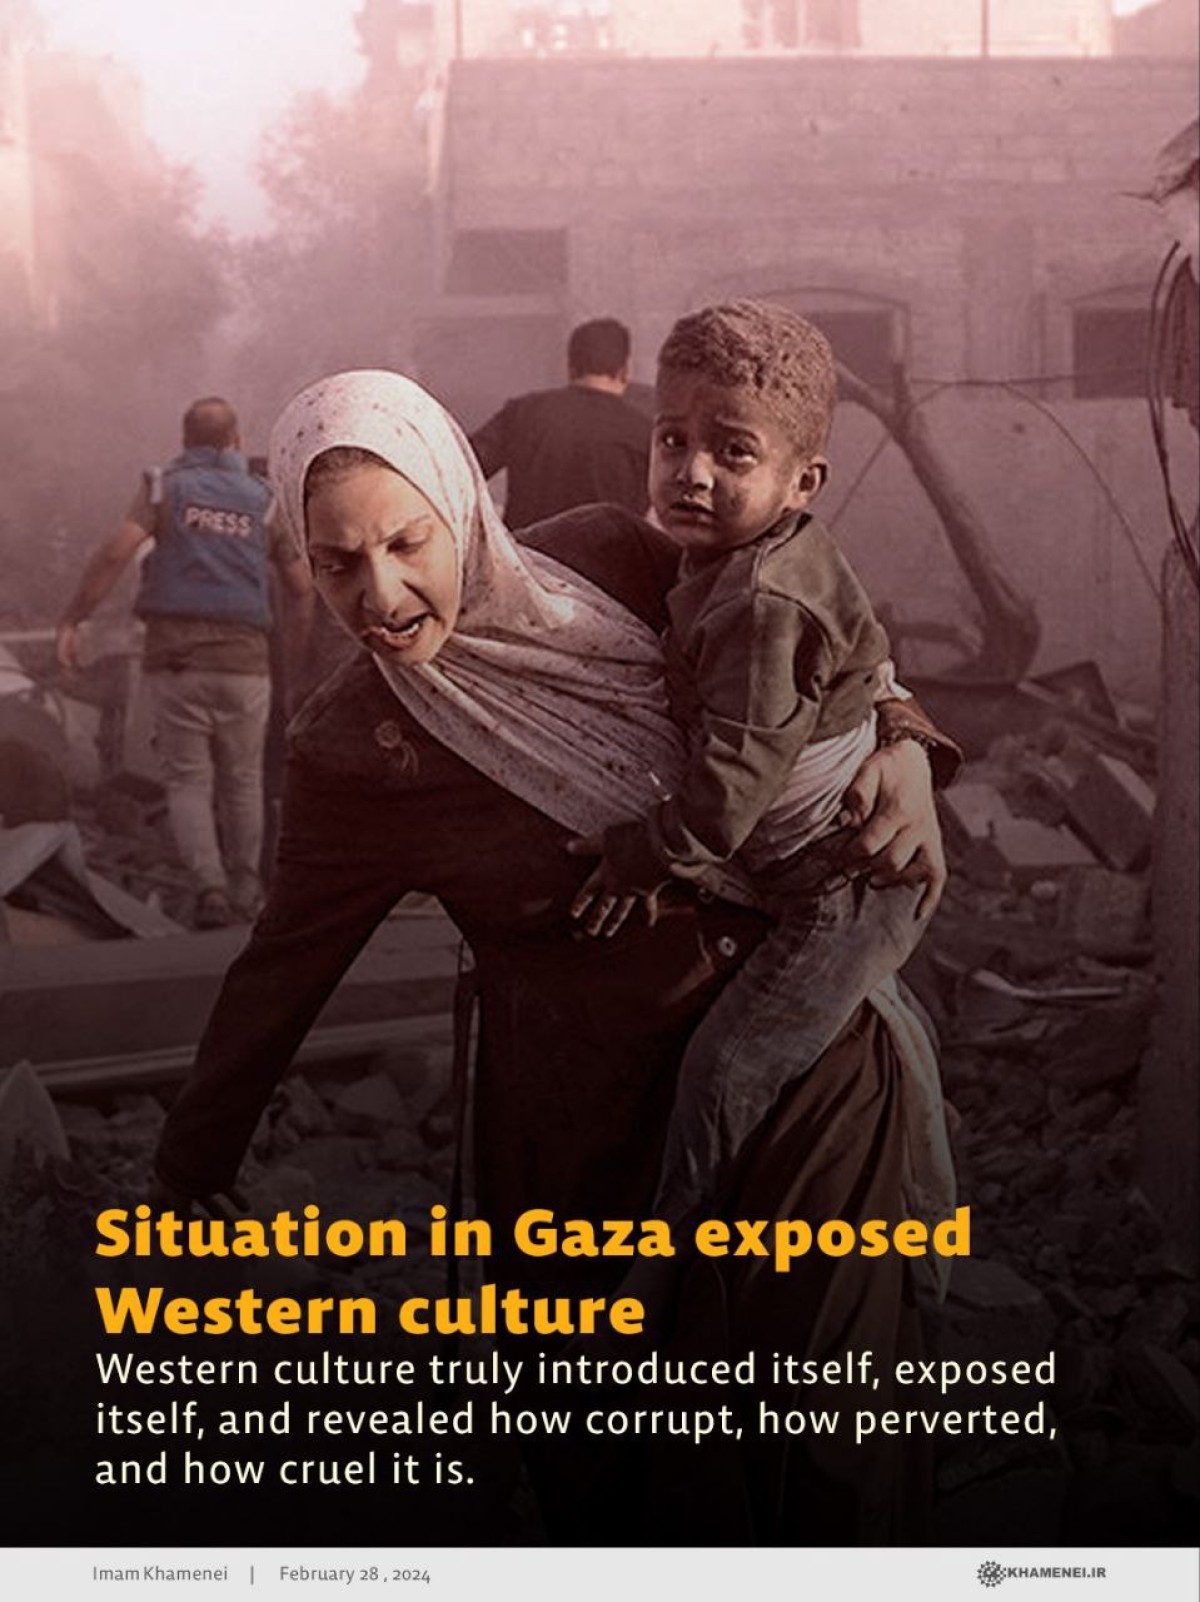 Situation in Gaza exposed Western culture